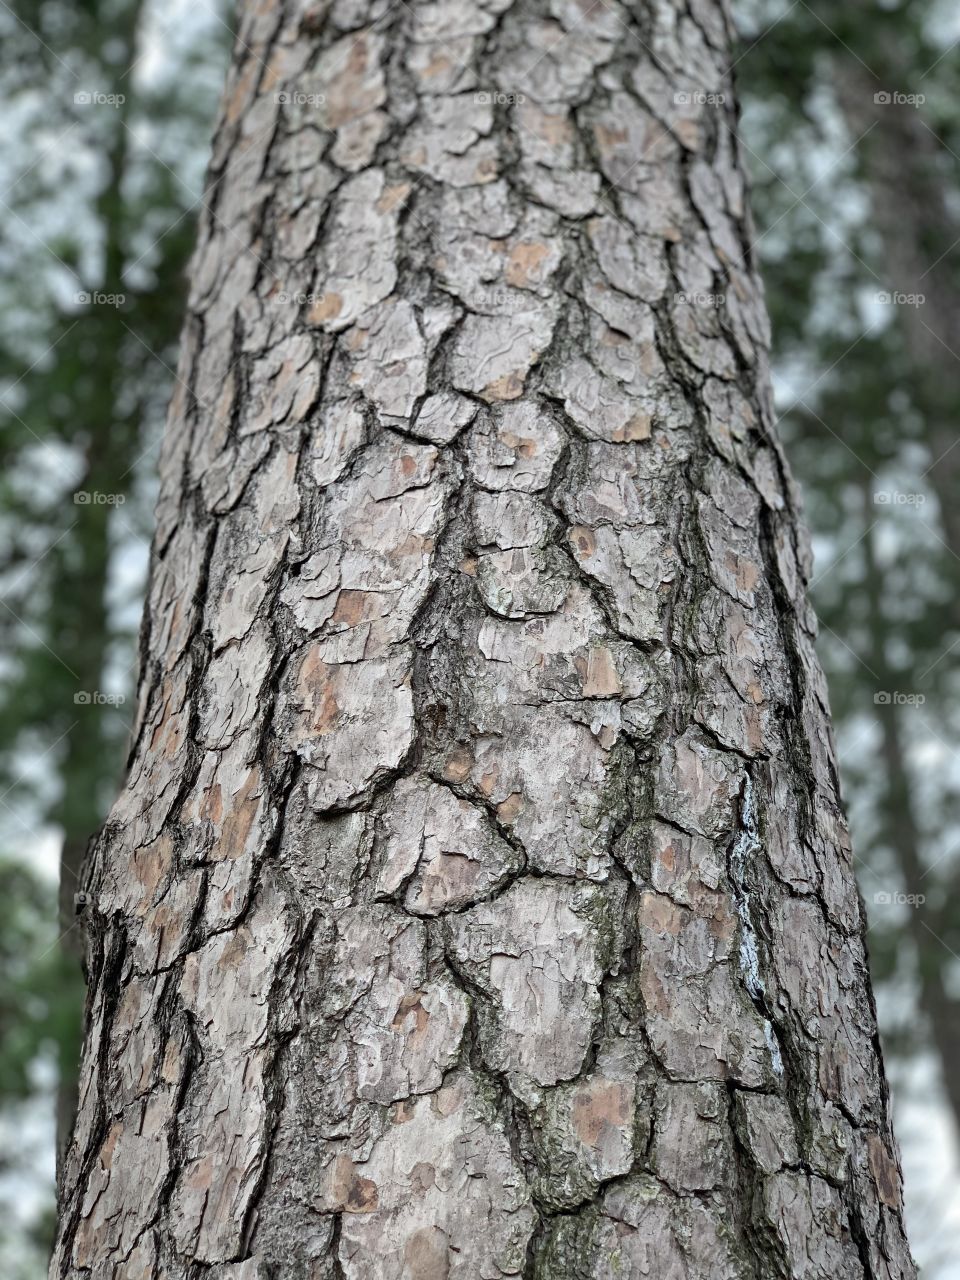 A closeup of tree bark with a blurry background.